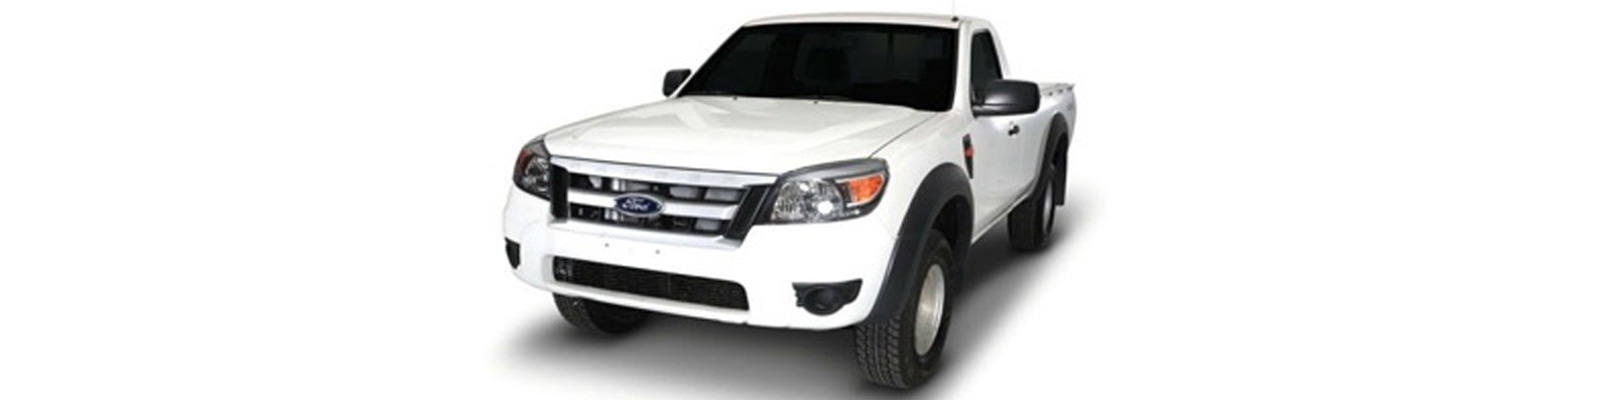 Accessories For The Ford Ranger Regular Cab 2009 to 2012